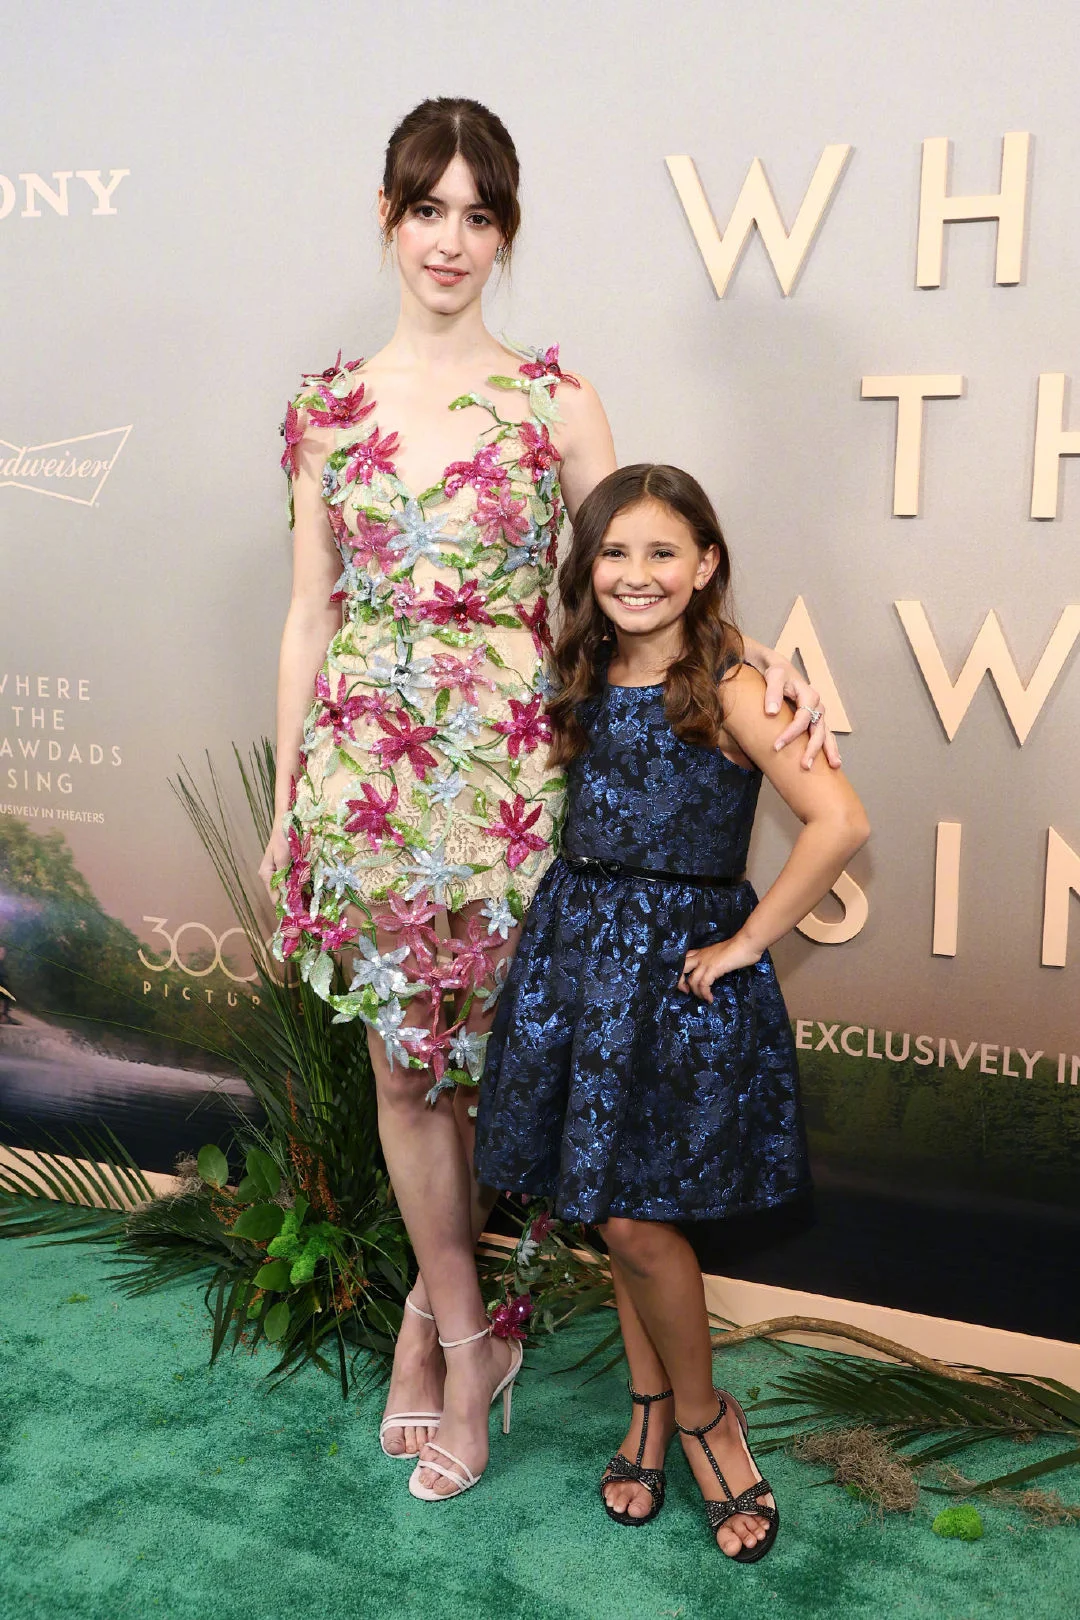 Daisy Edgar-Jones at the premiere of her new film 'Where the Crawdads Sing‎' | FMV6